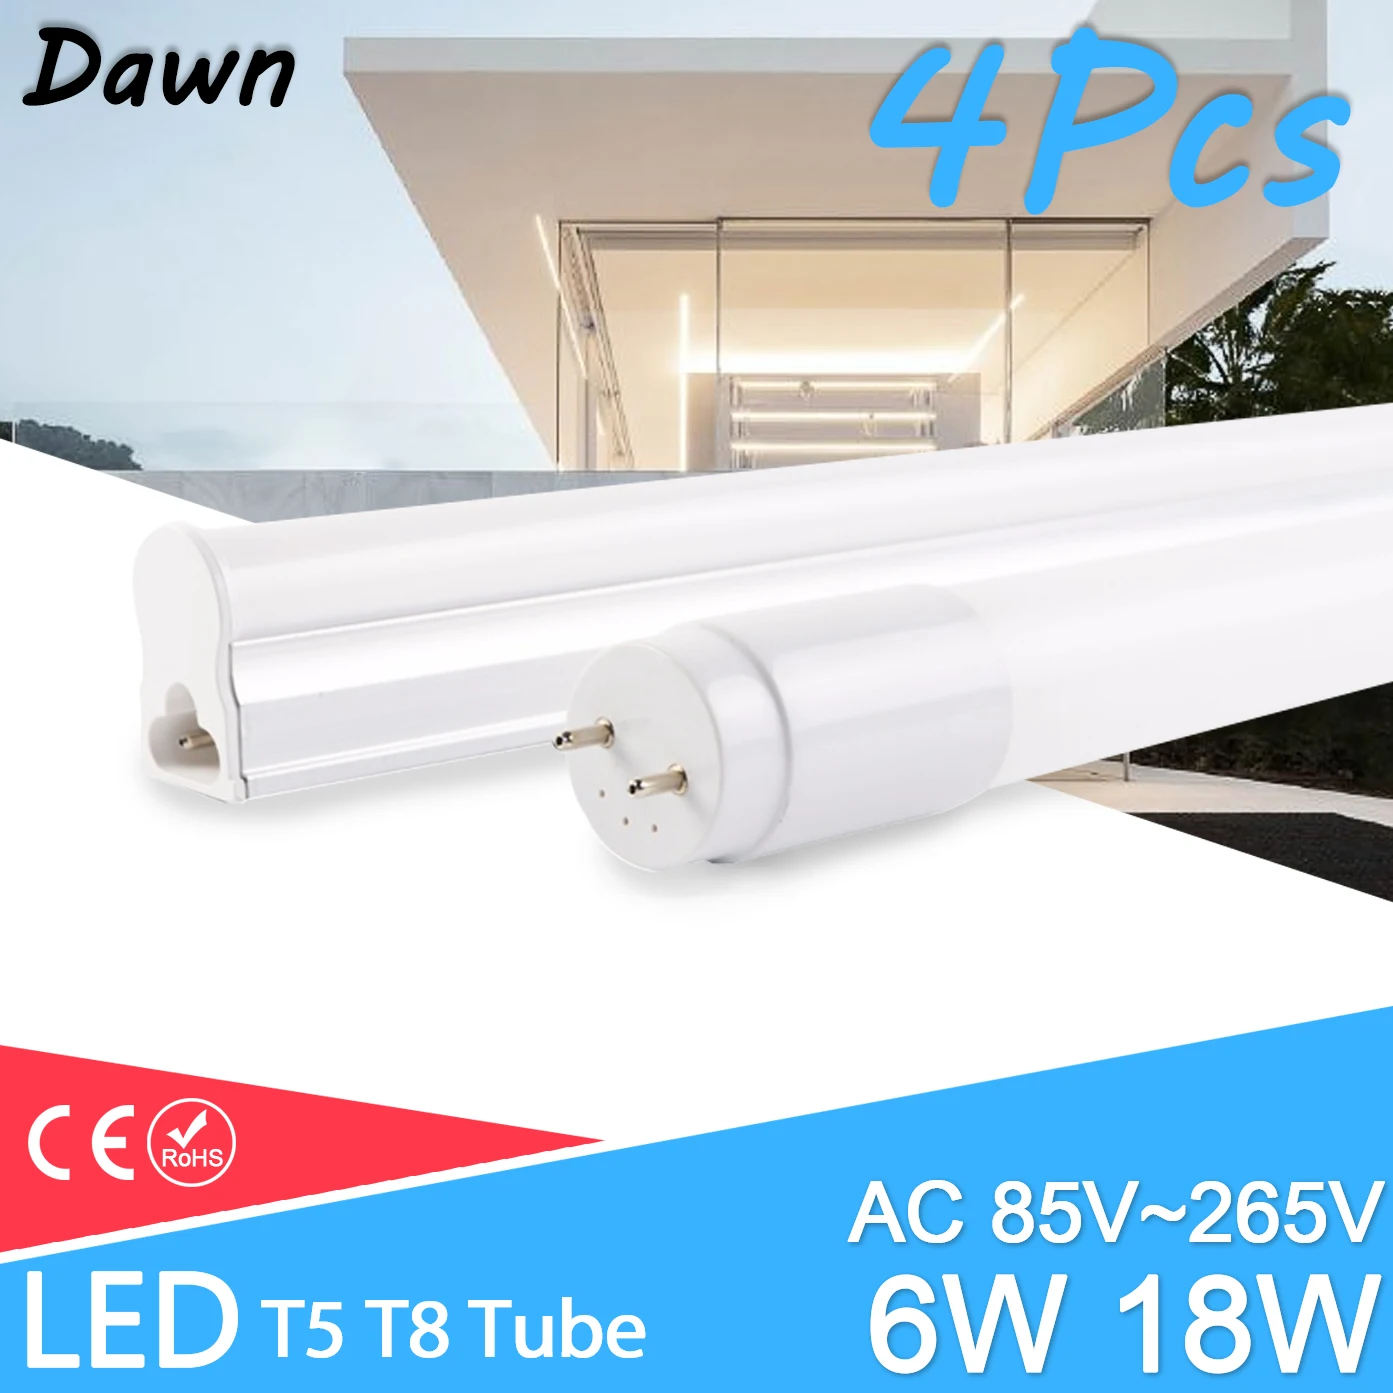 4pcs LED Tube T5 T8 AC 110V 220V 240Vled tube light 6w 30cm 18w 60cm SMD2835 LED T8 Integrated Driver Fluorescent Lamp